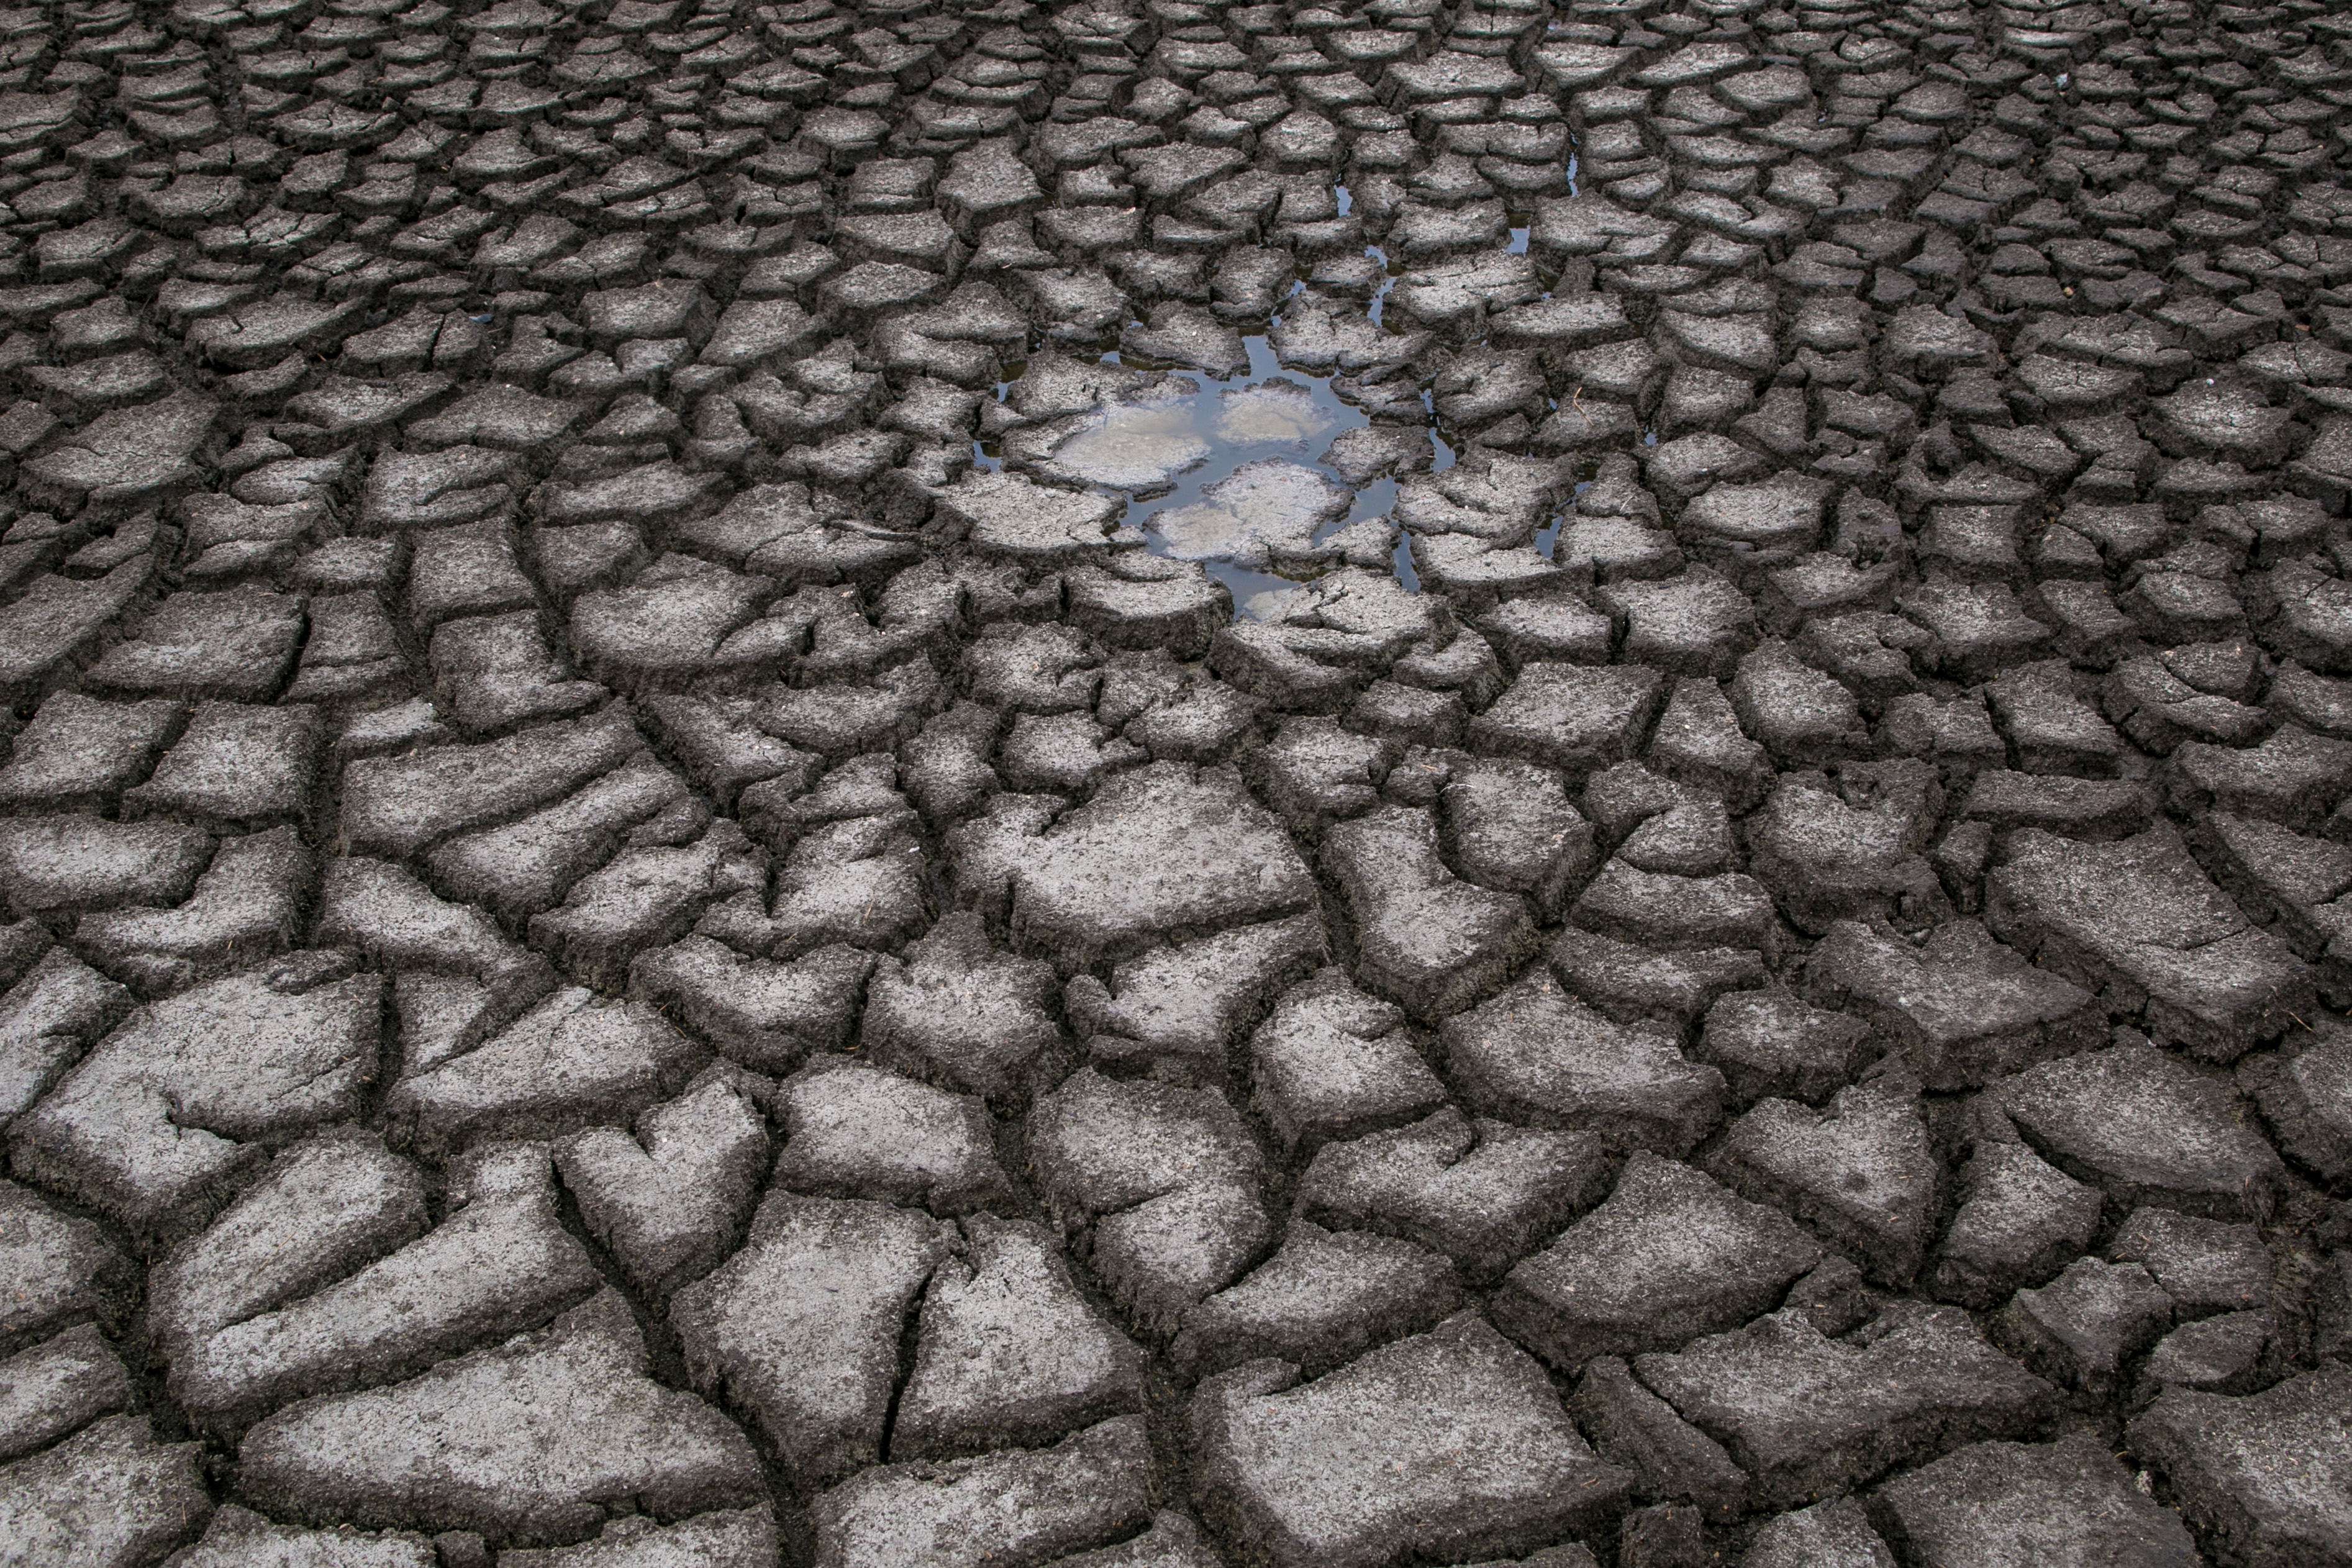 LOMPOC, CA - NOVEMBER 15:  A dried mud flat along a stretch of the now dry Santa Ynez River is viewed on November 15, 2015, near Lompoc, California. Because of its close proximity to Southern California and Los Angeles population centers, the coastal region of Santa Barbara has become a popular weekend getaway destination for millions of tourists each year. (Getty Images) (Getty Images)